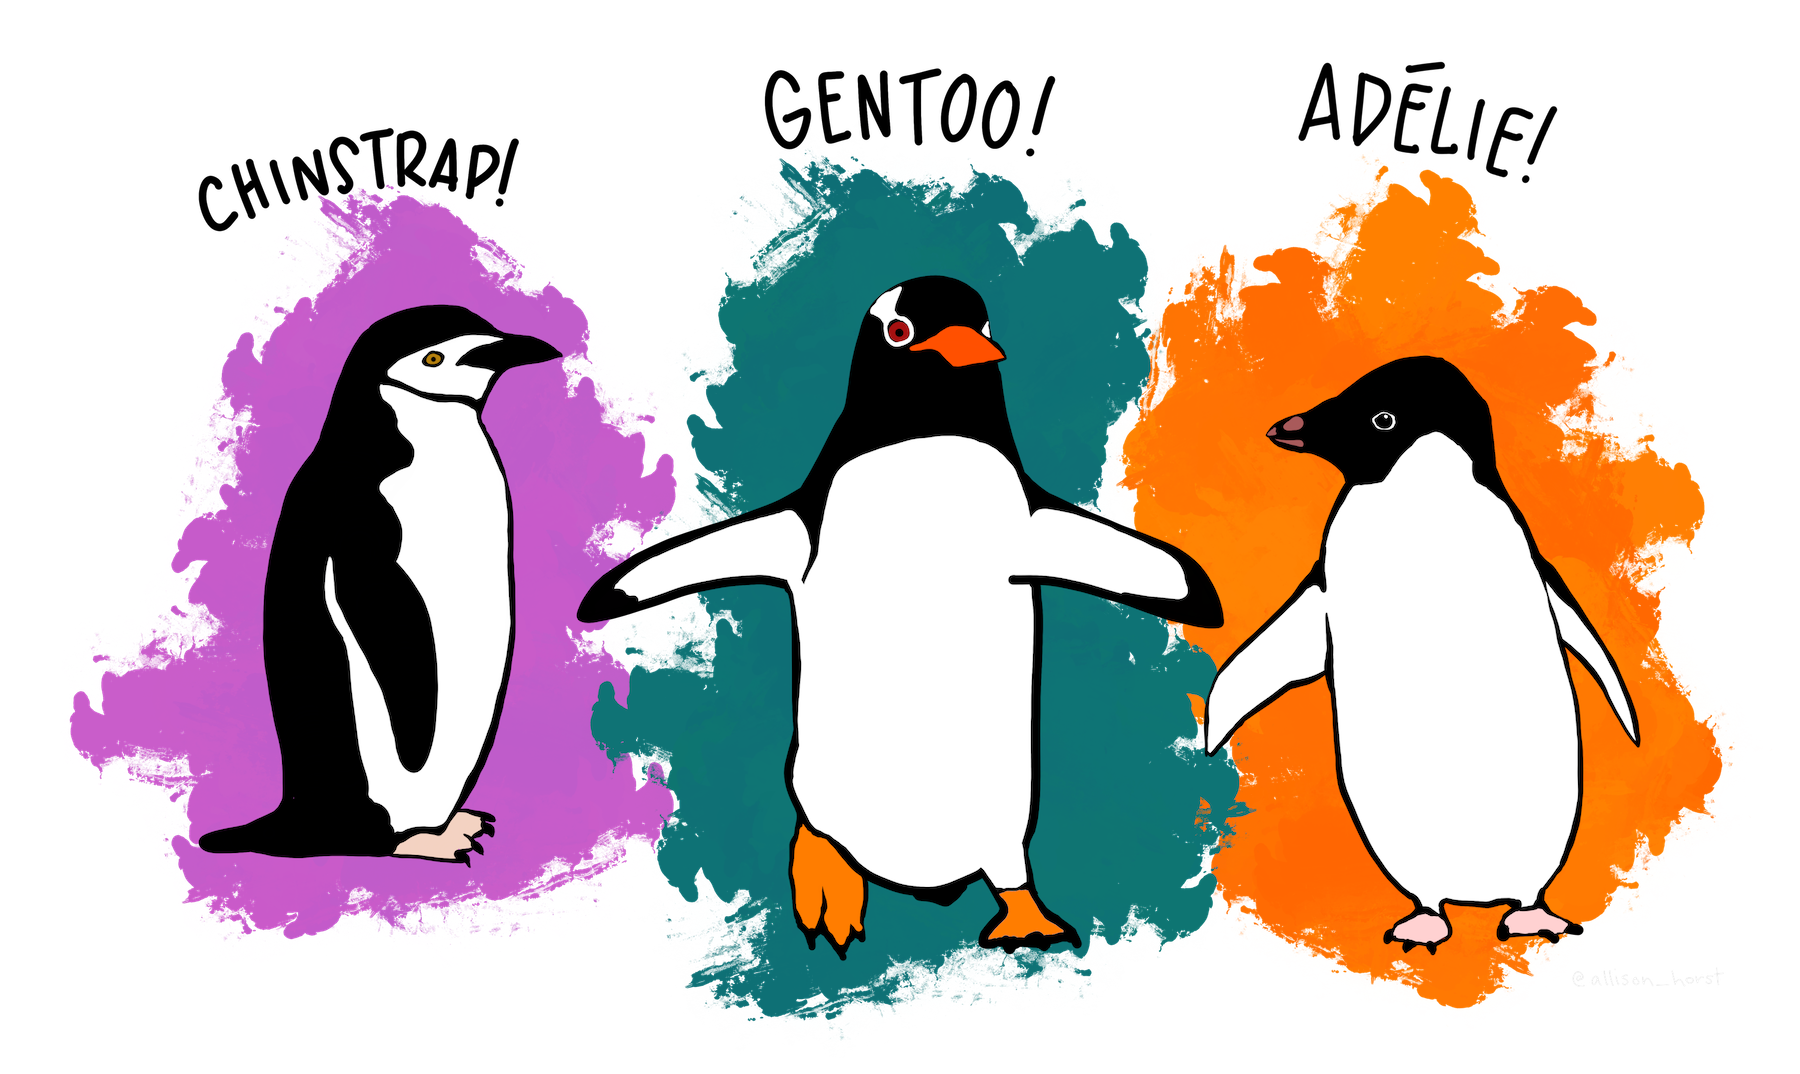 Sketch showing the three species of penguins.